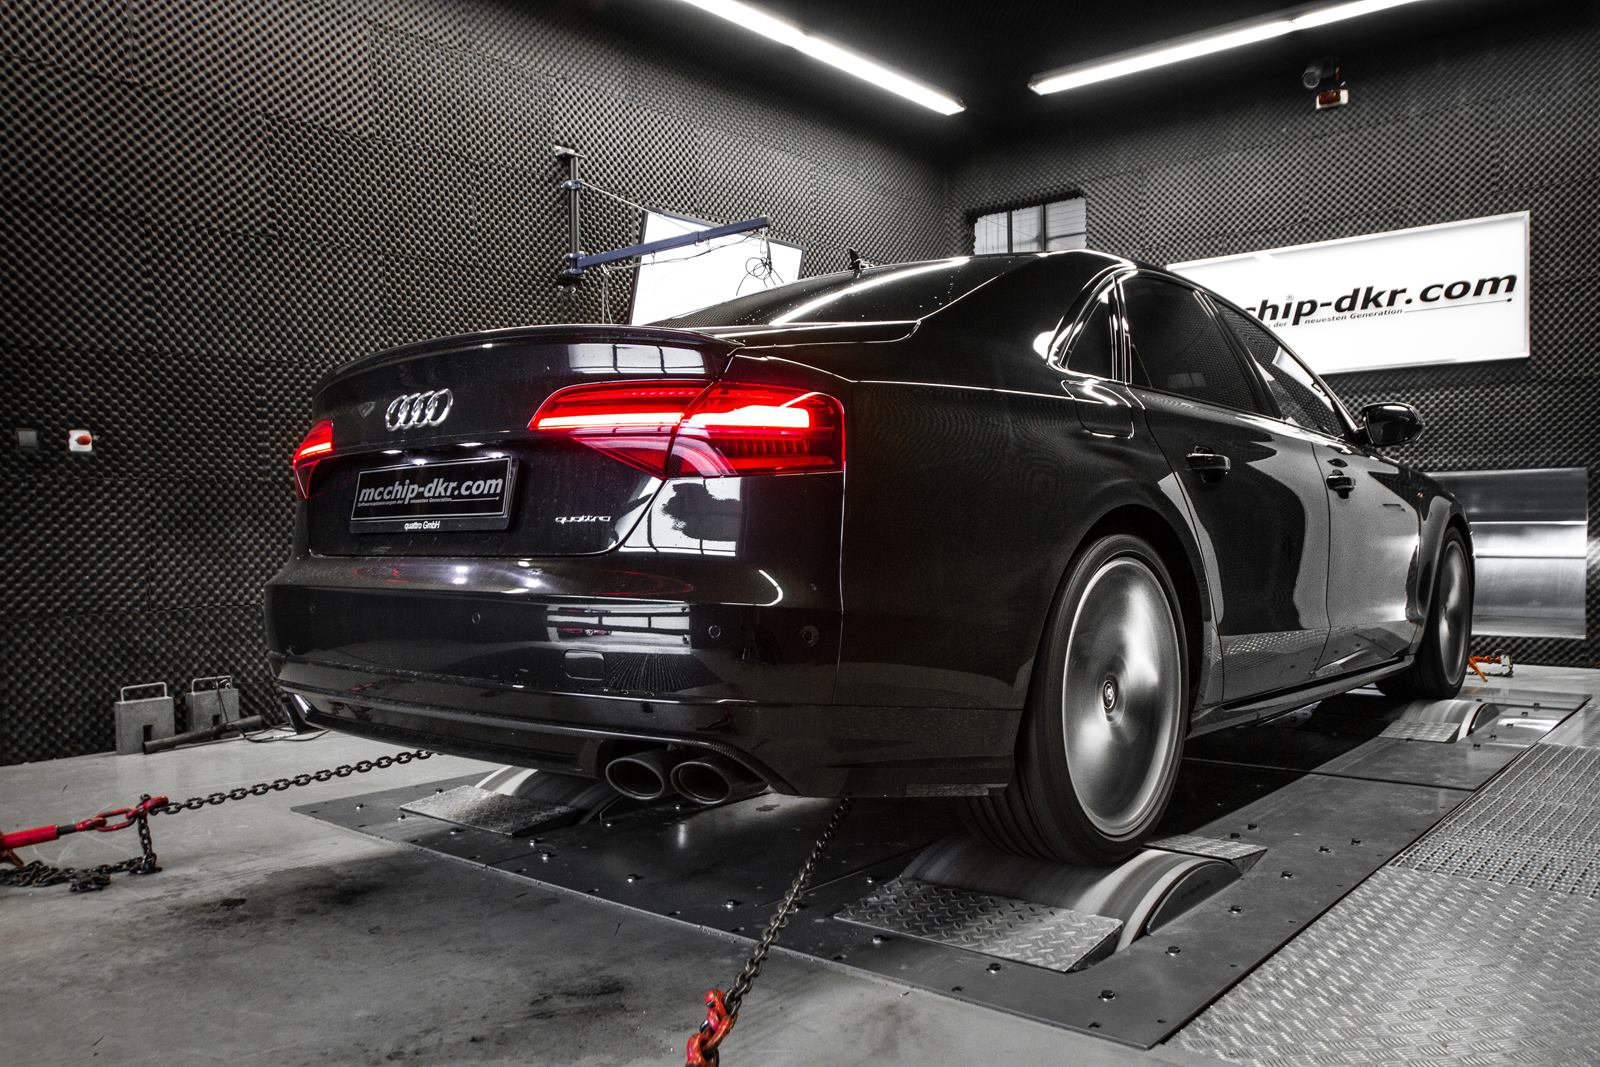 audi-s8-tuned-to-790-hp-by-mcchip-dkr-and-the-photos-are-cool_5-autonovosti.me-4